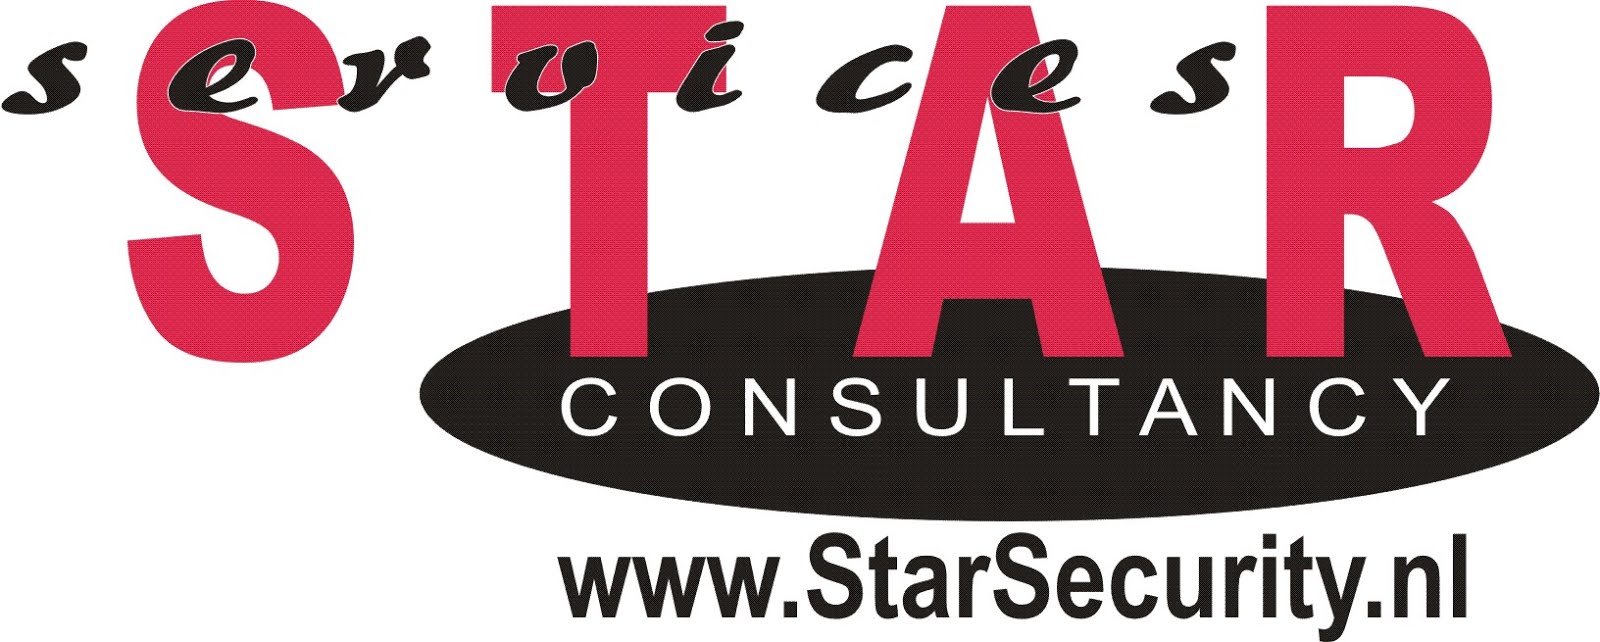 Star Services Consultancy